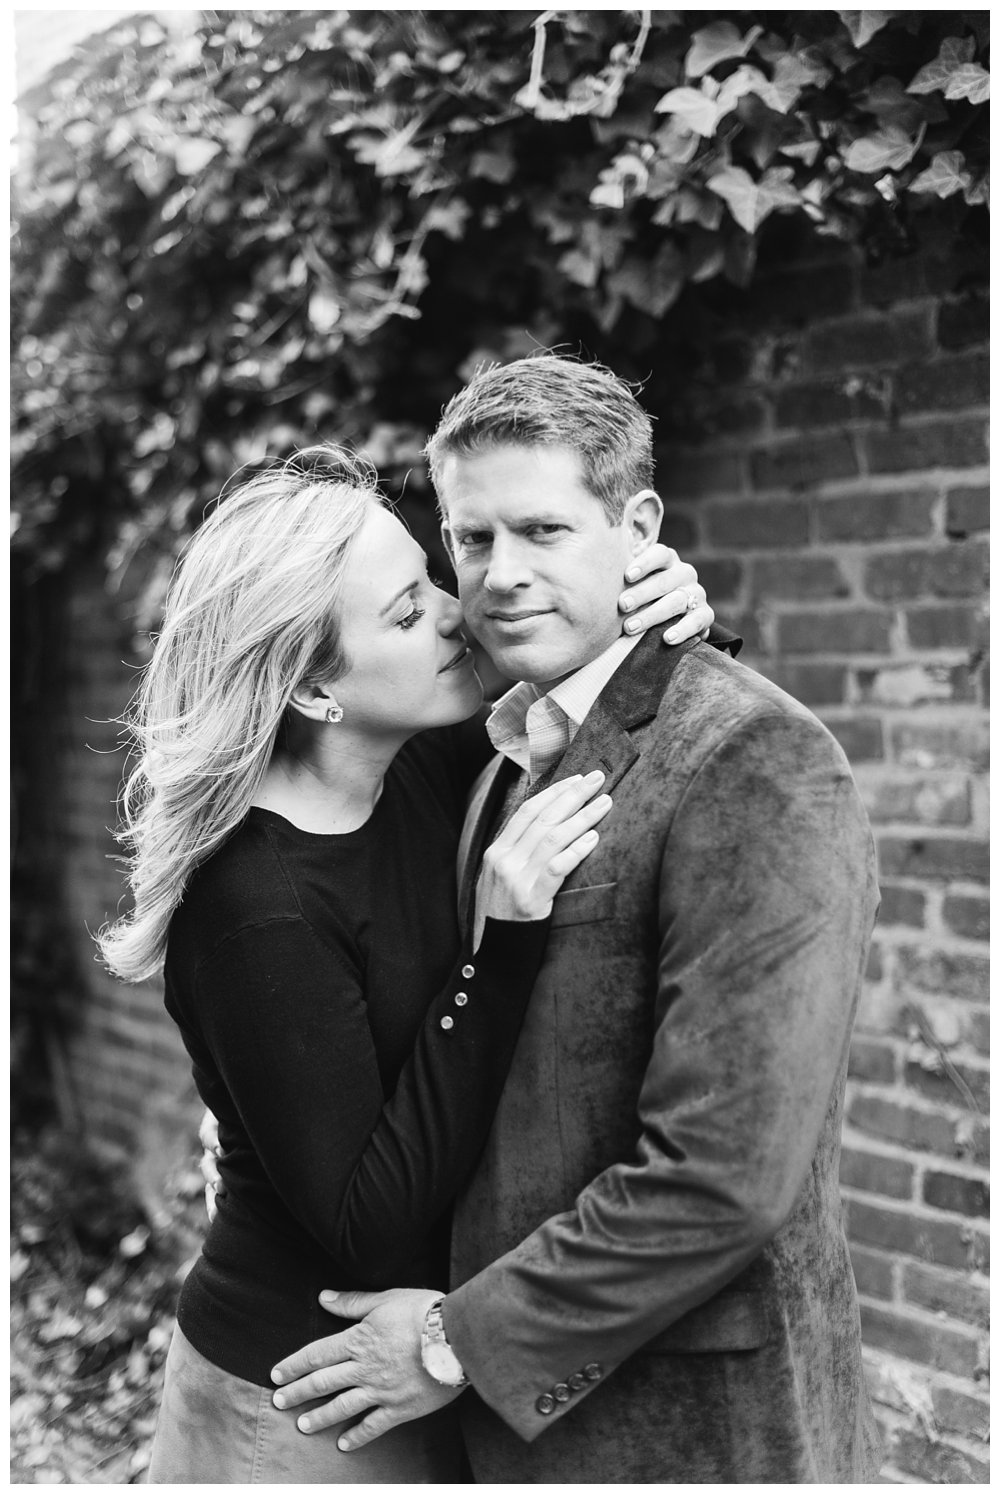 Old town Alexandria Engagement Photography